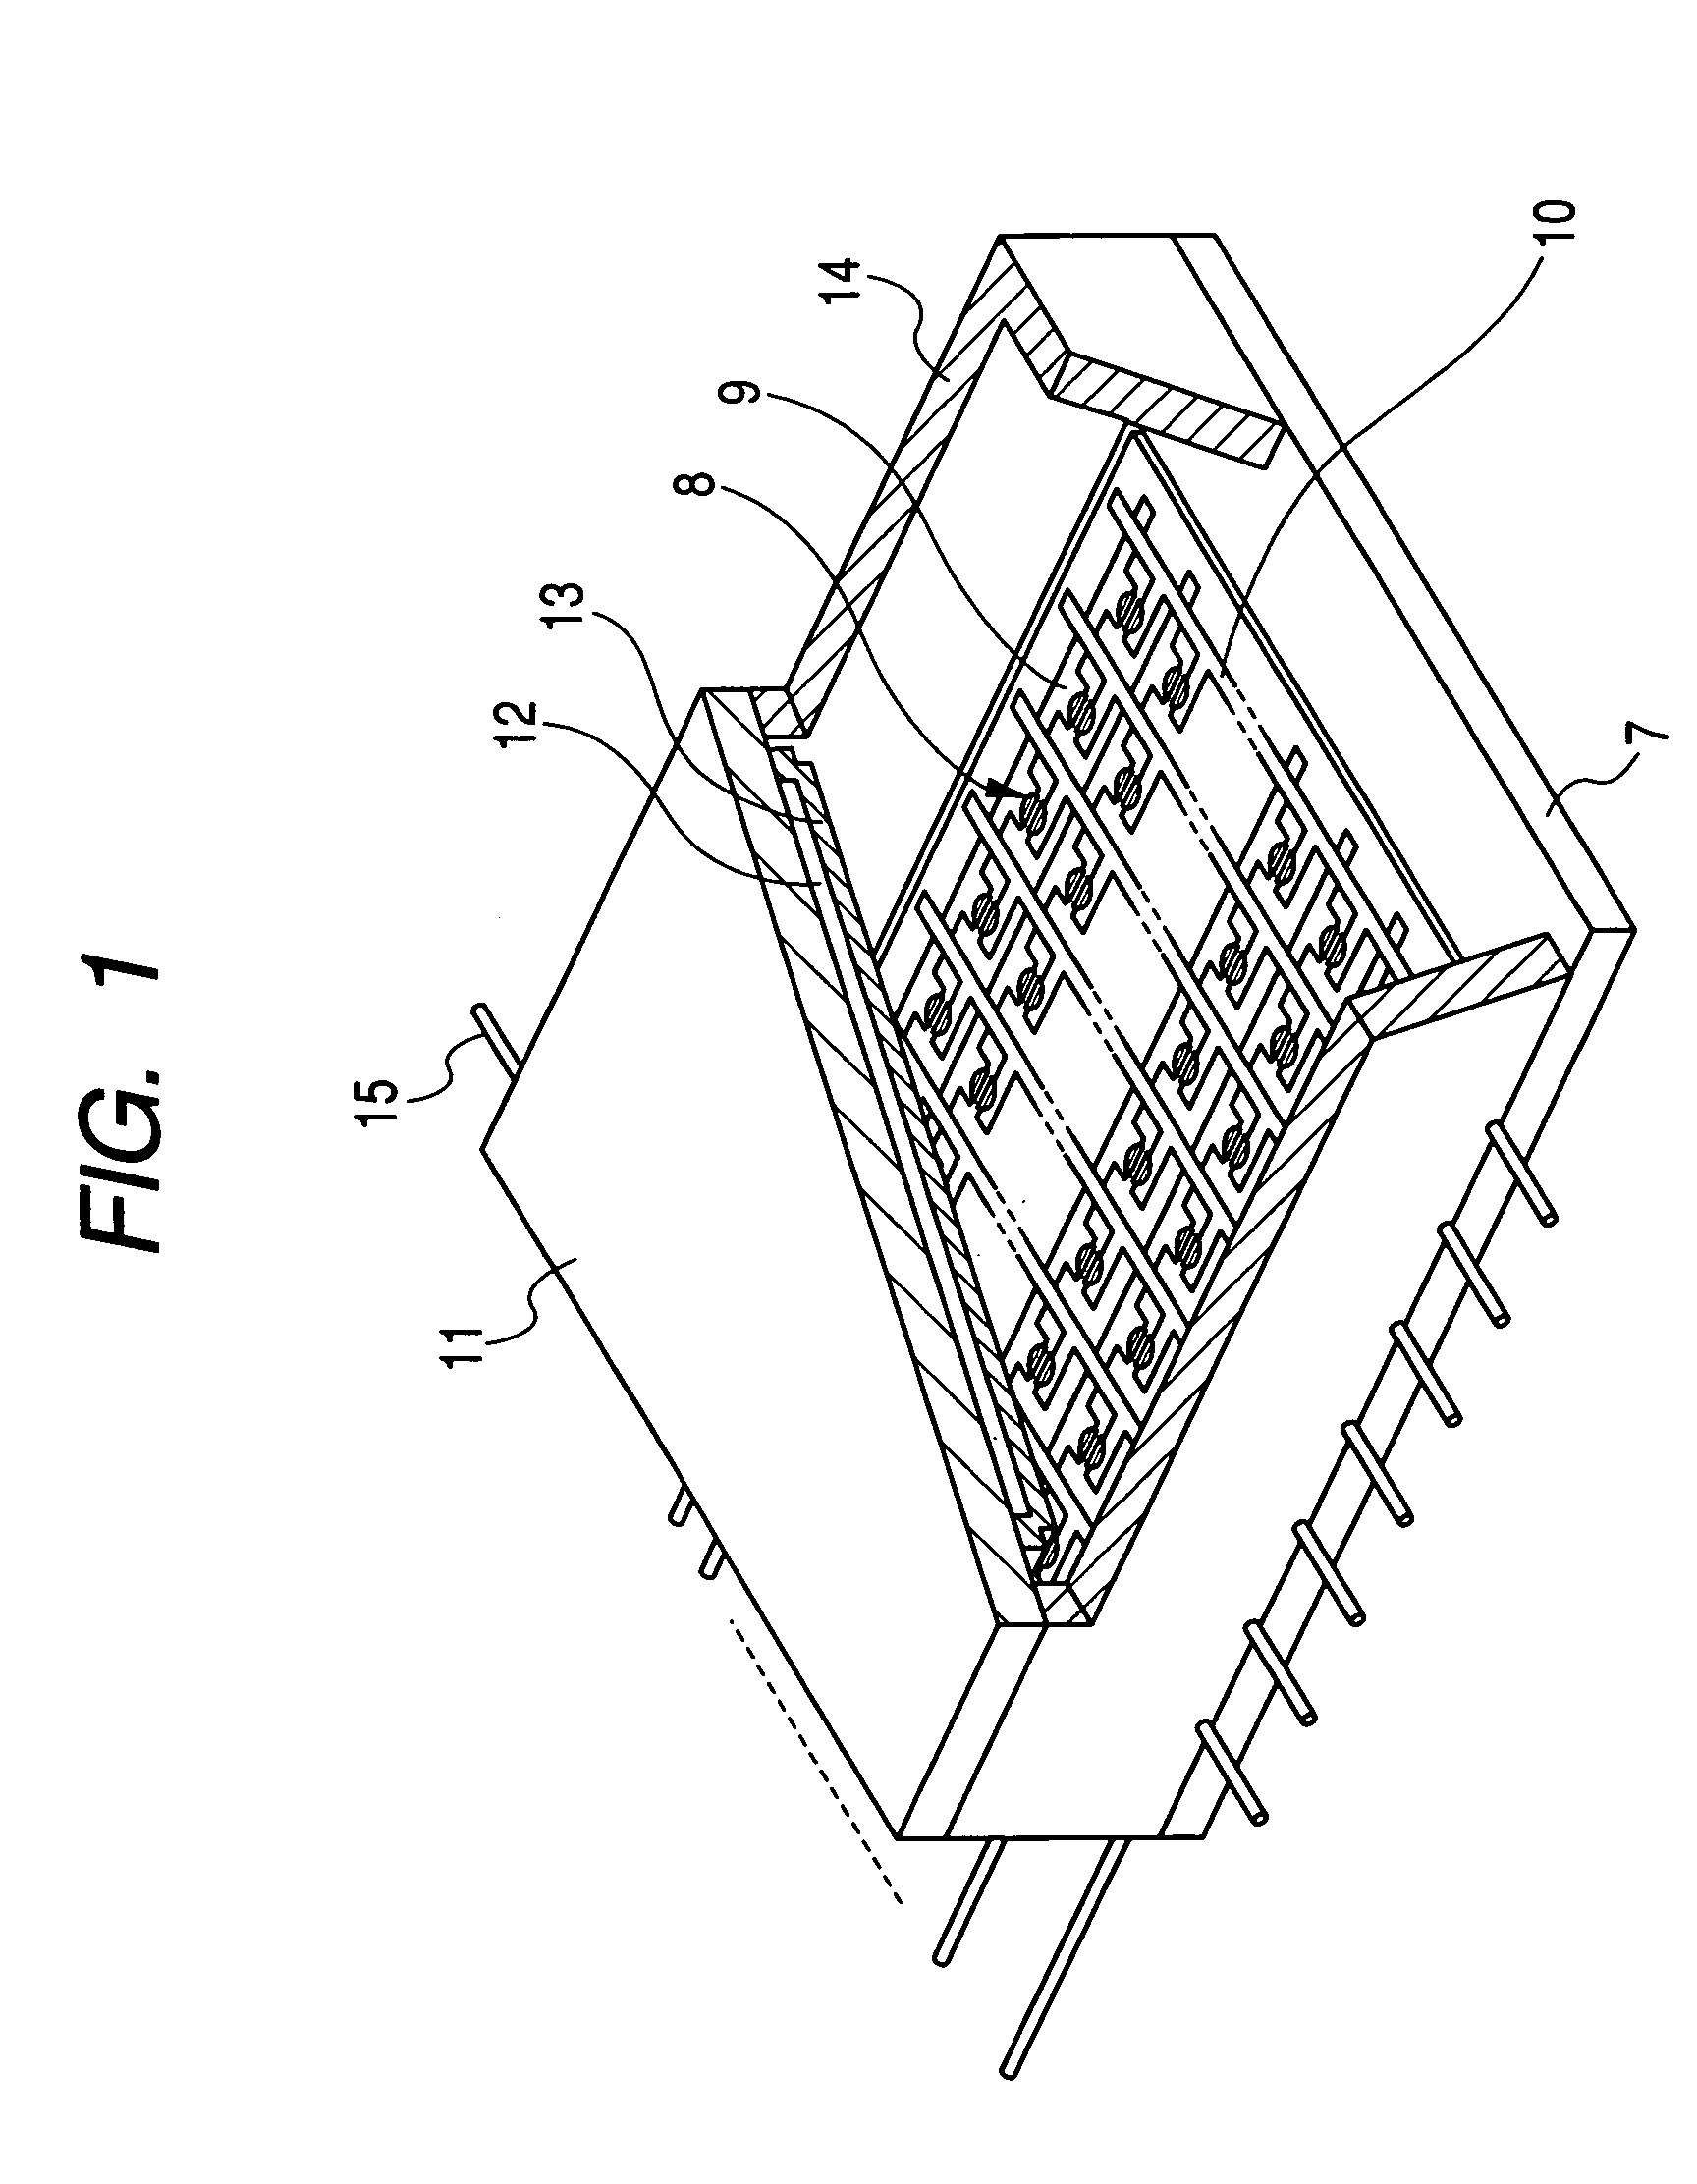 Electron emitting devices having metal-based film formed over an electro-conductive film element